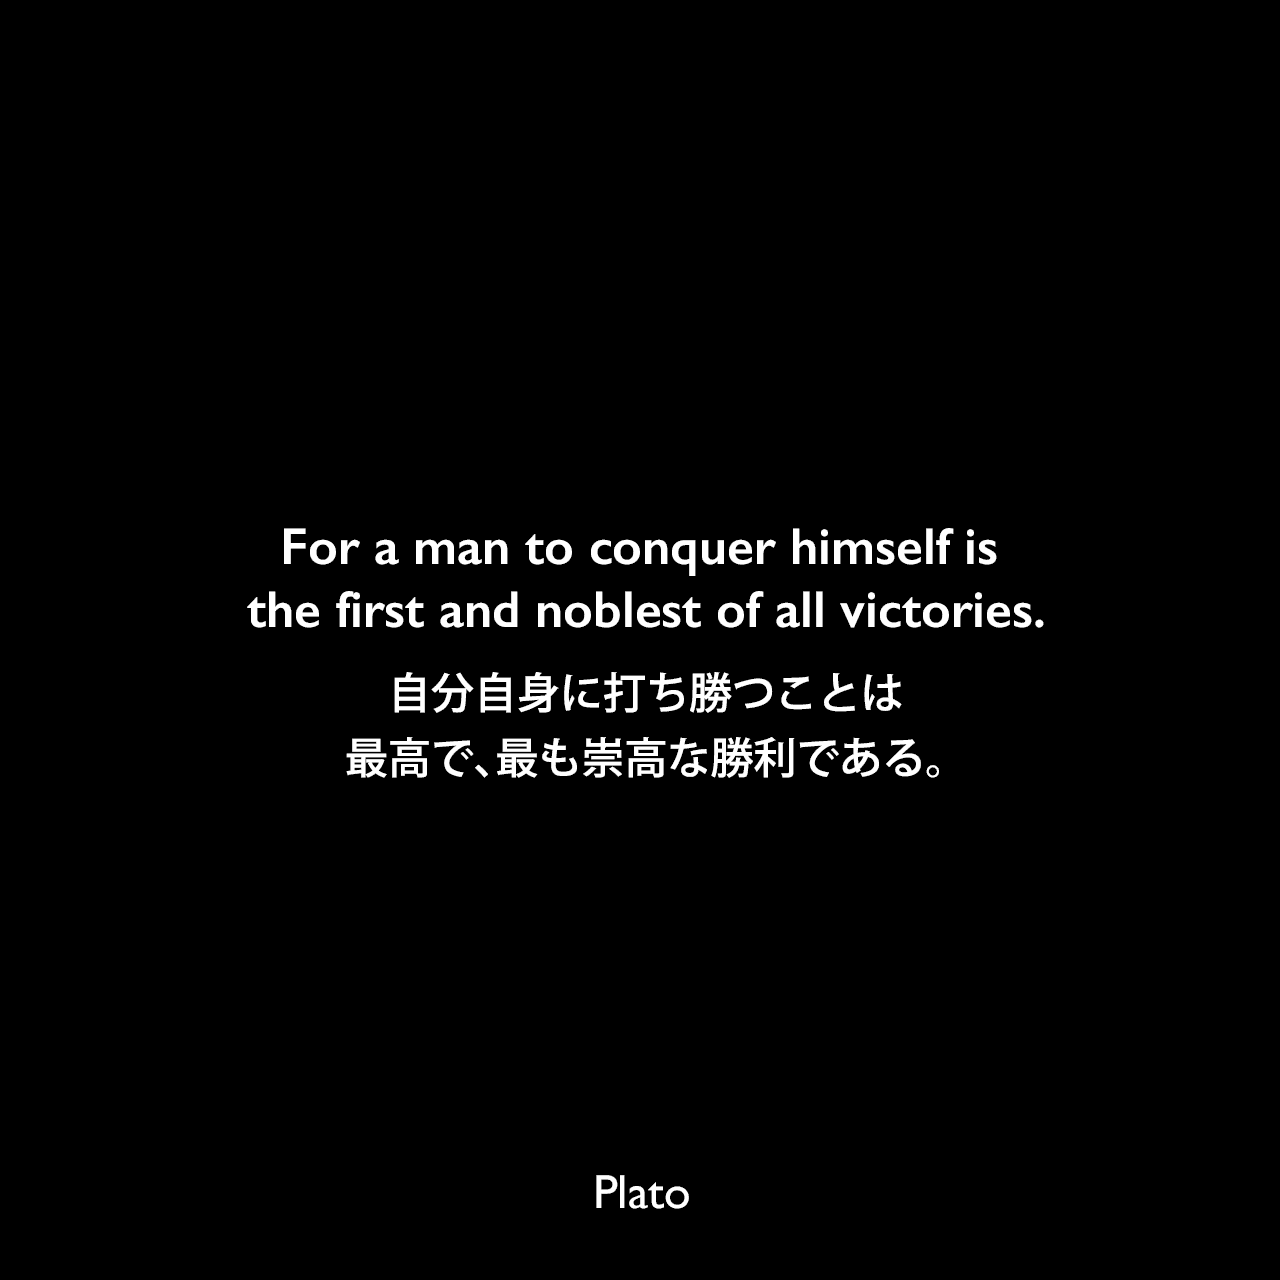 For a man to conquer himself is the first and noblest of all victories.自分自身に打ち勝つことは、最高で、最も崇高な勝利である。Plato